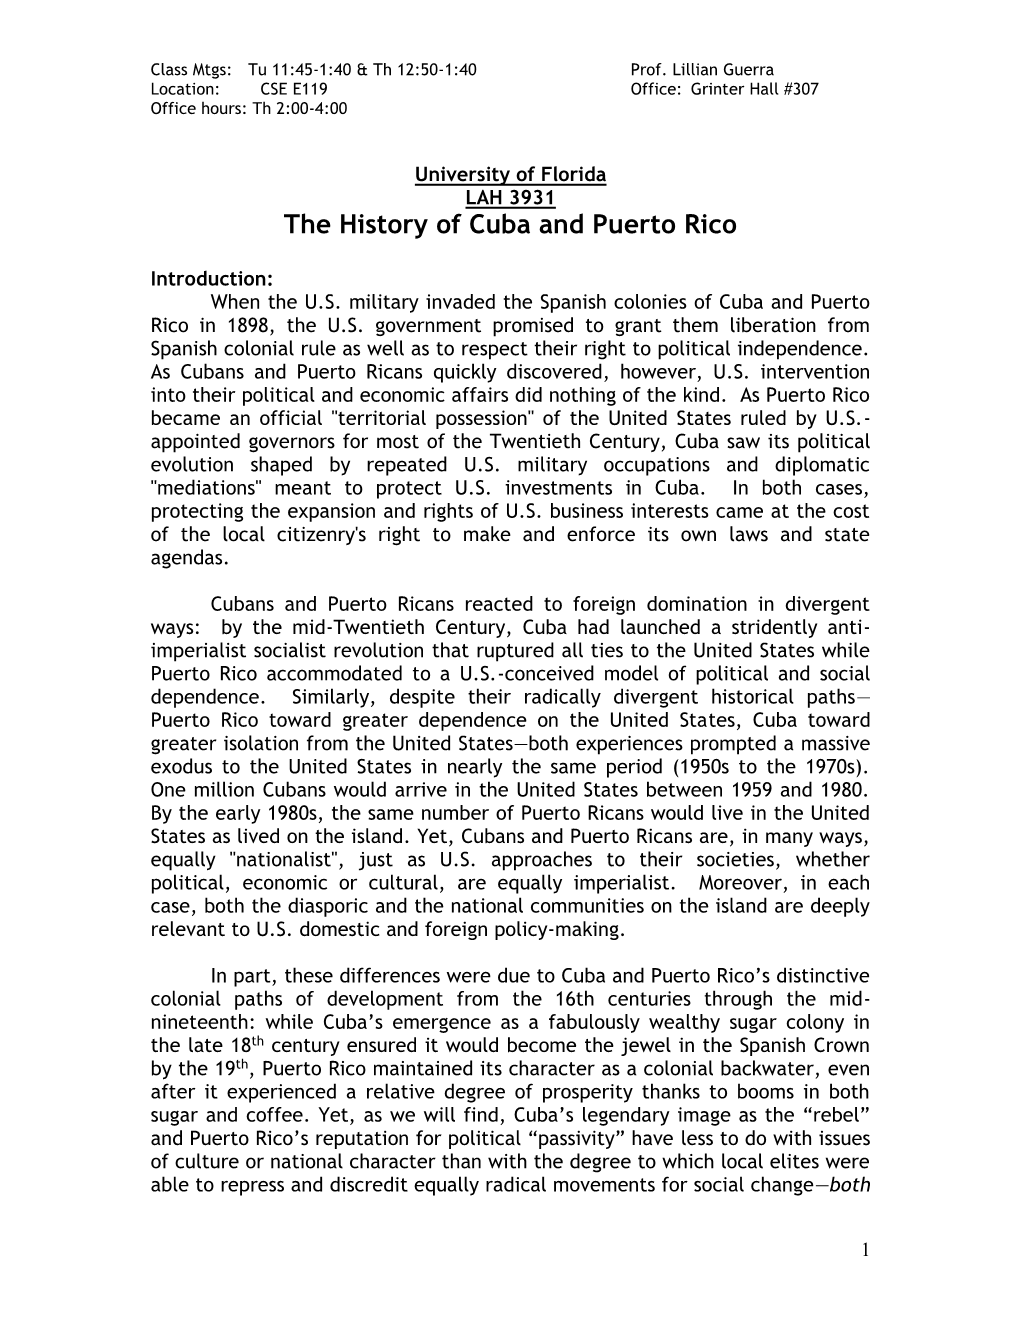 The History of Cuba and Puerto Rico